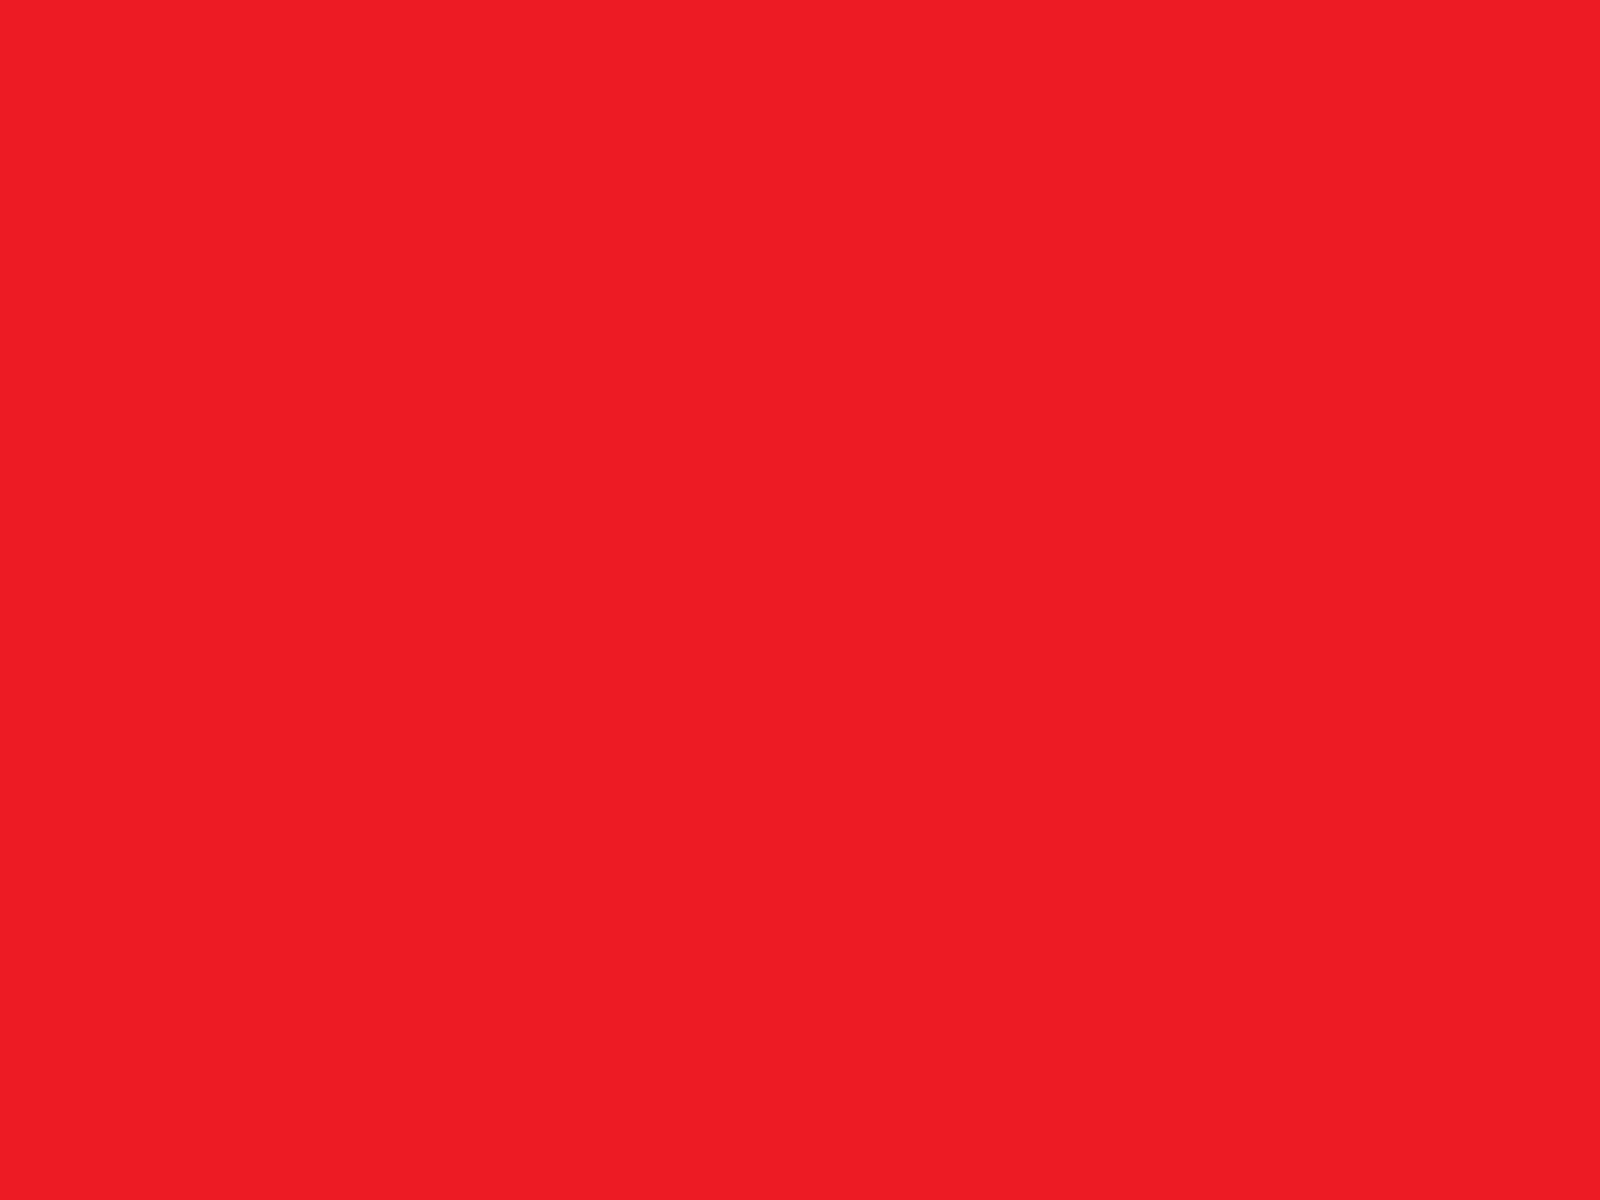 1600x1200 Red Pigment Solid Color Background